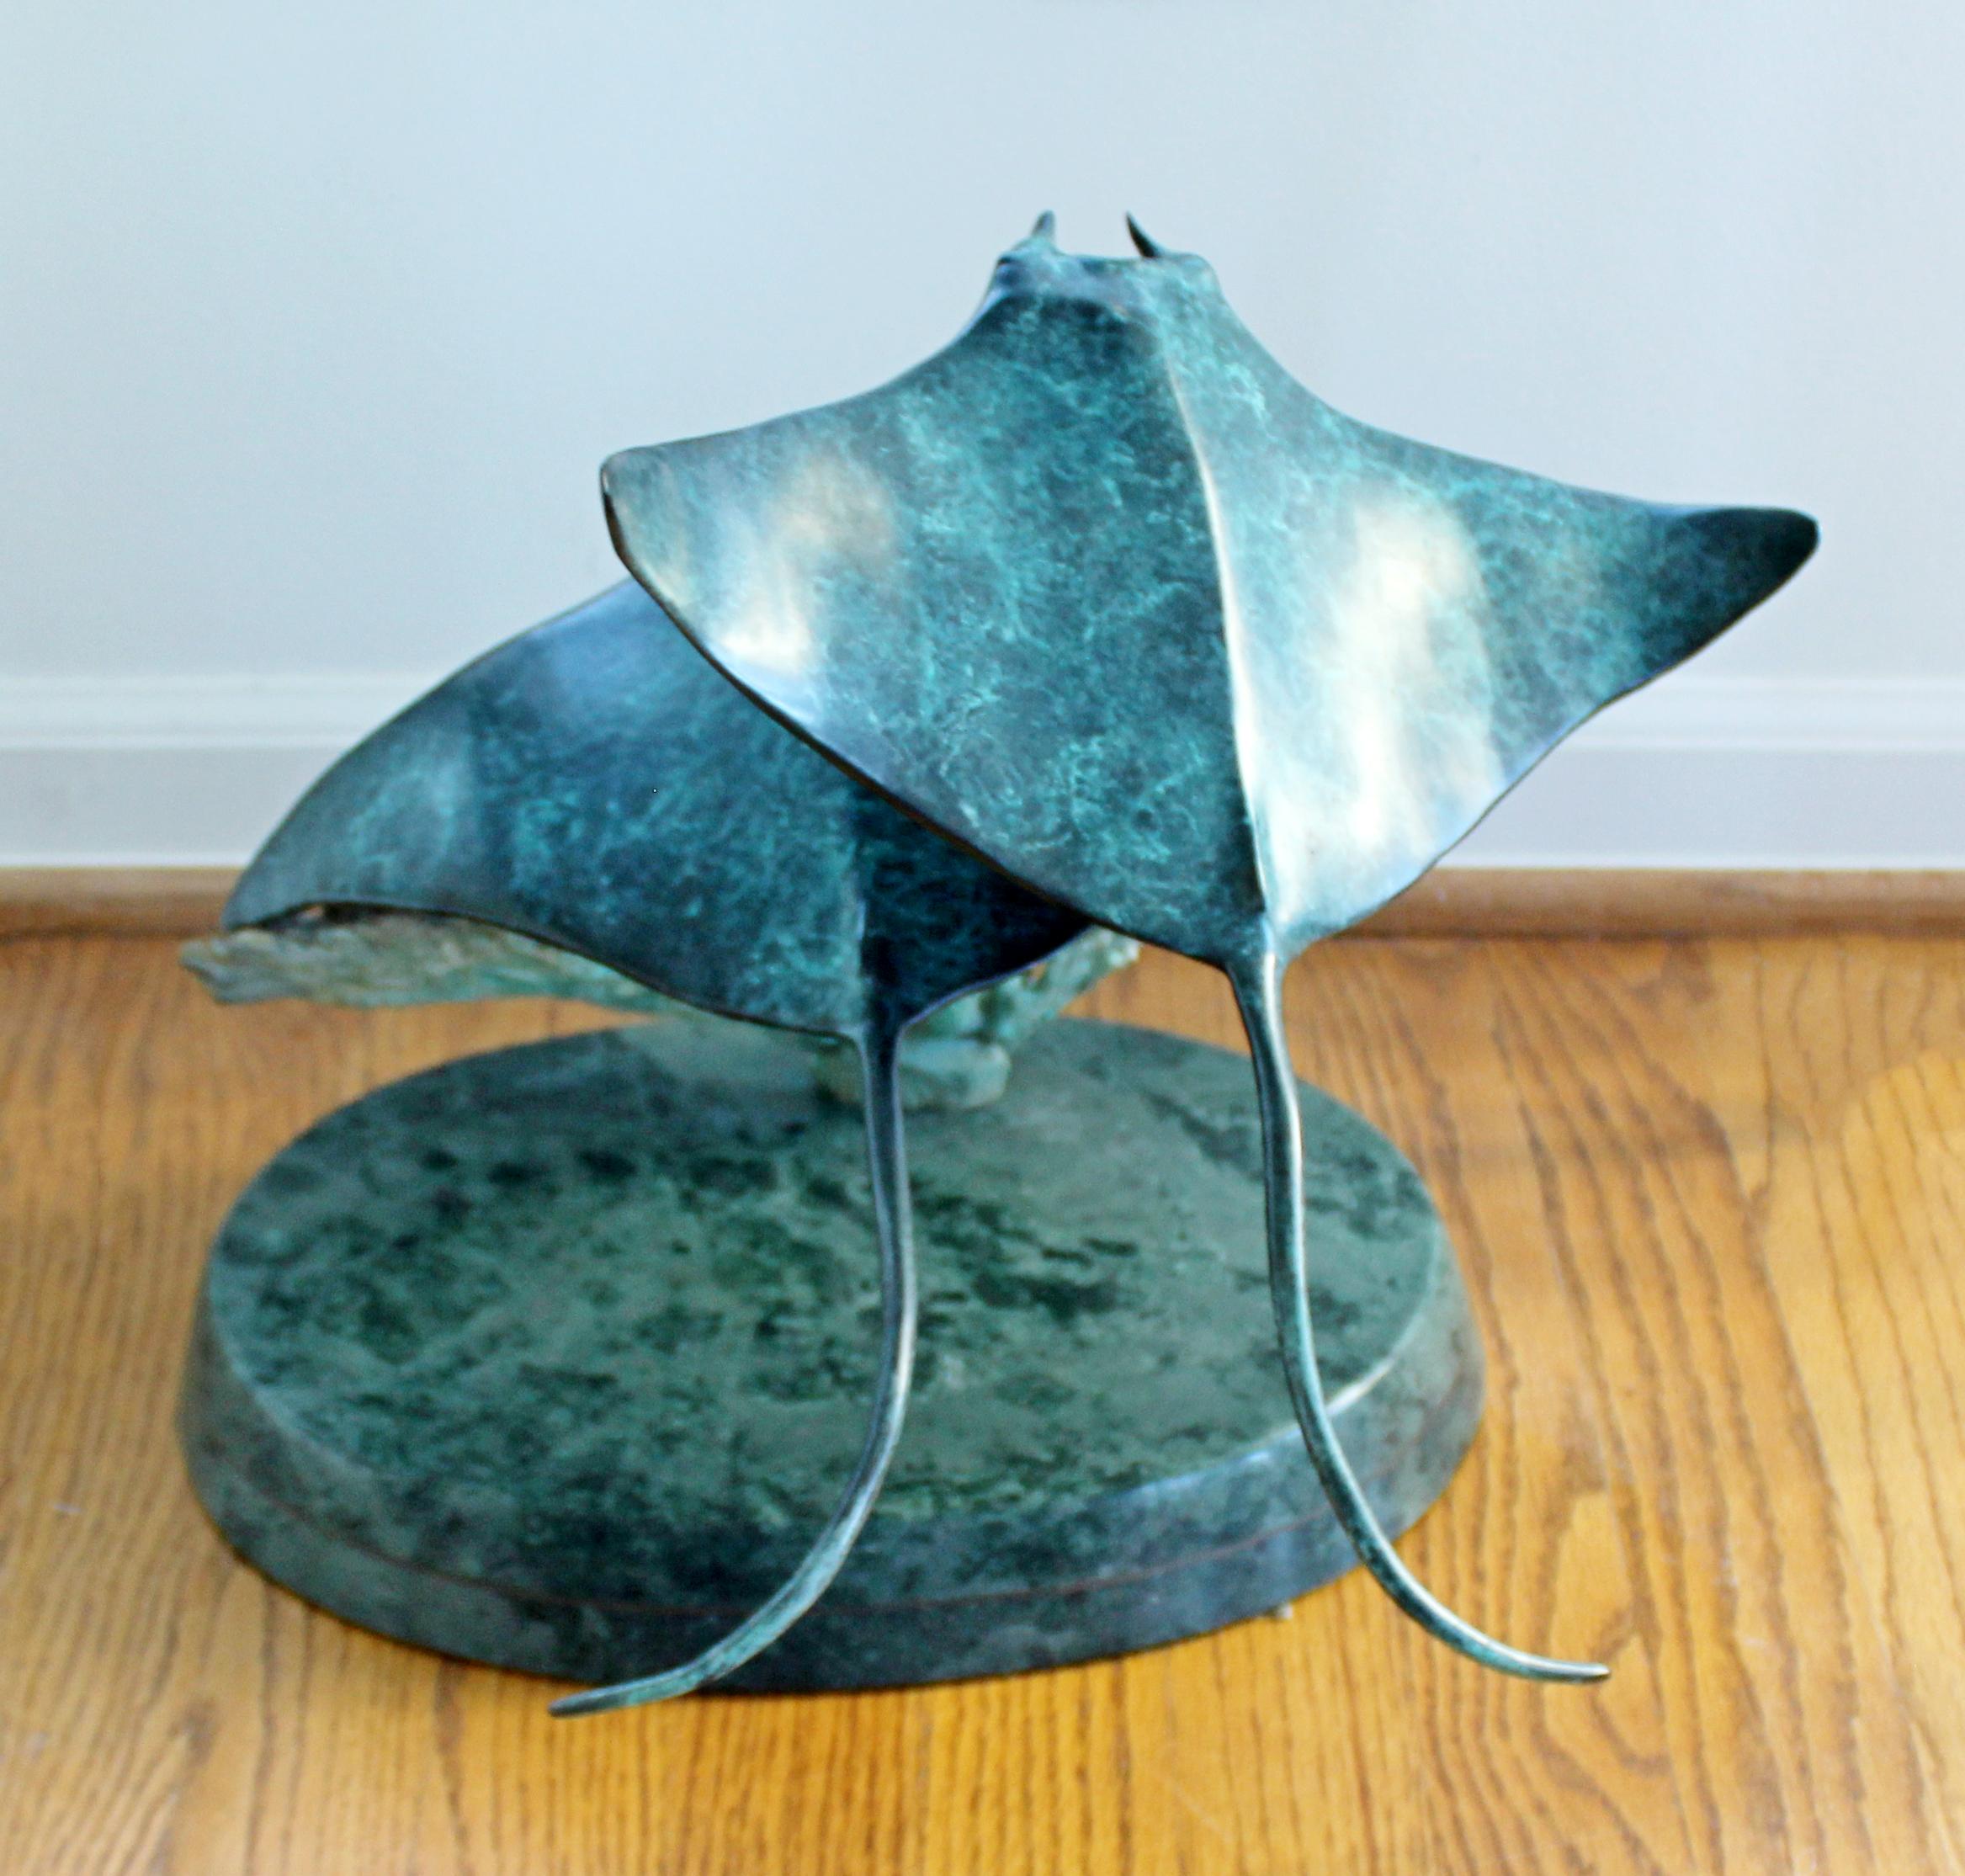 American Contemporary Bronze Sculpture Signed Robert Wyland Manta Rays #40/300, 1990s